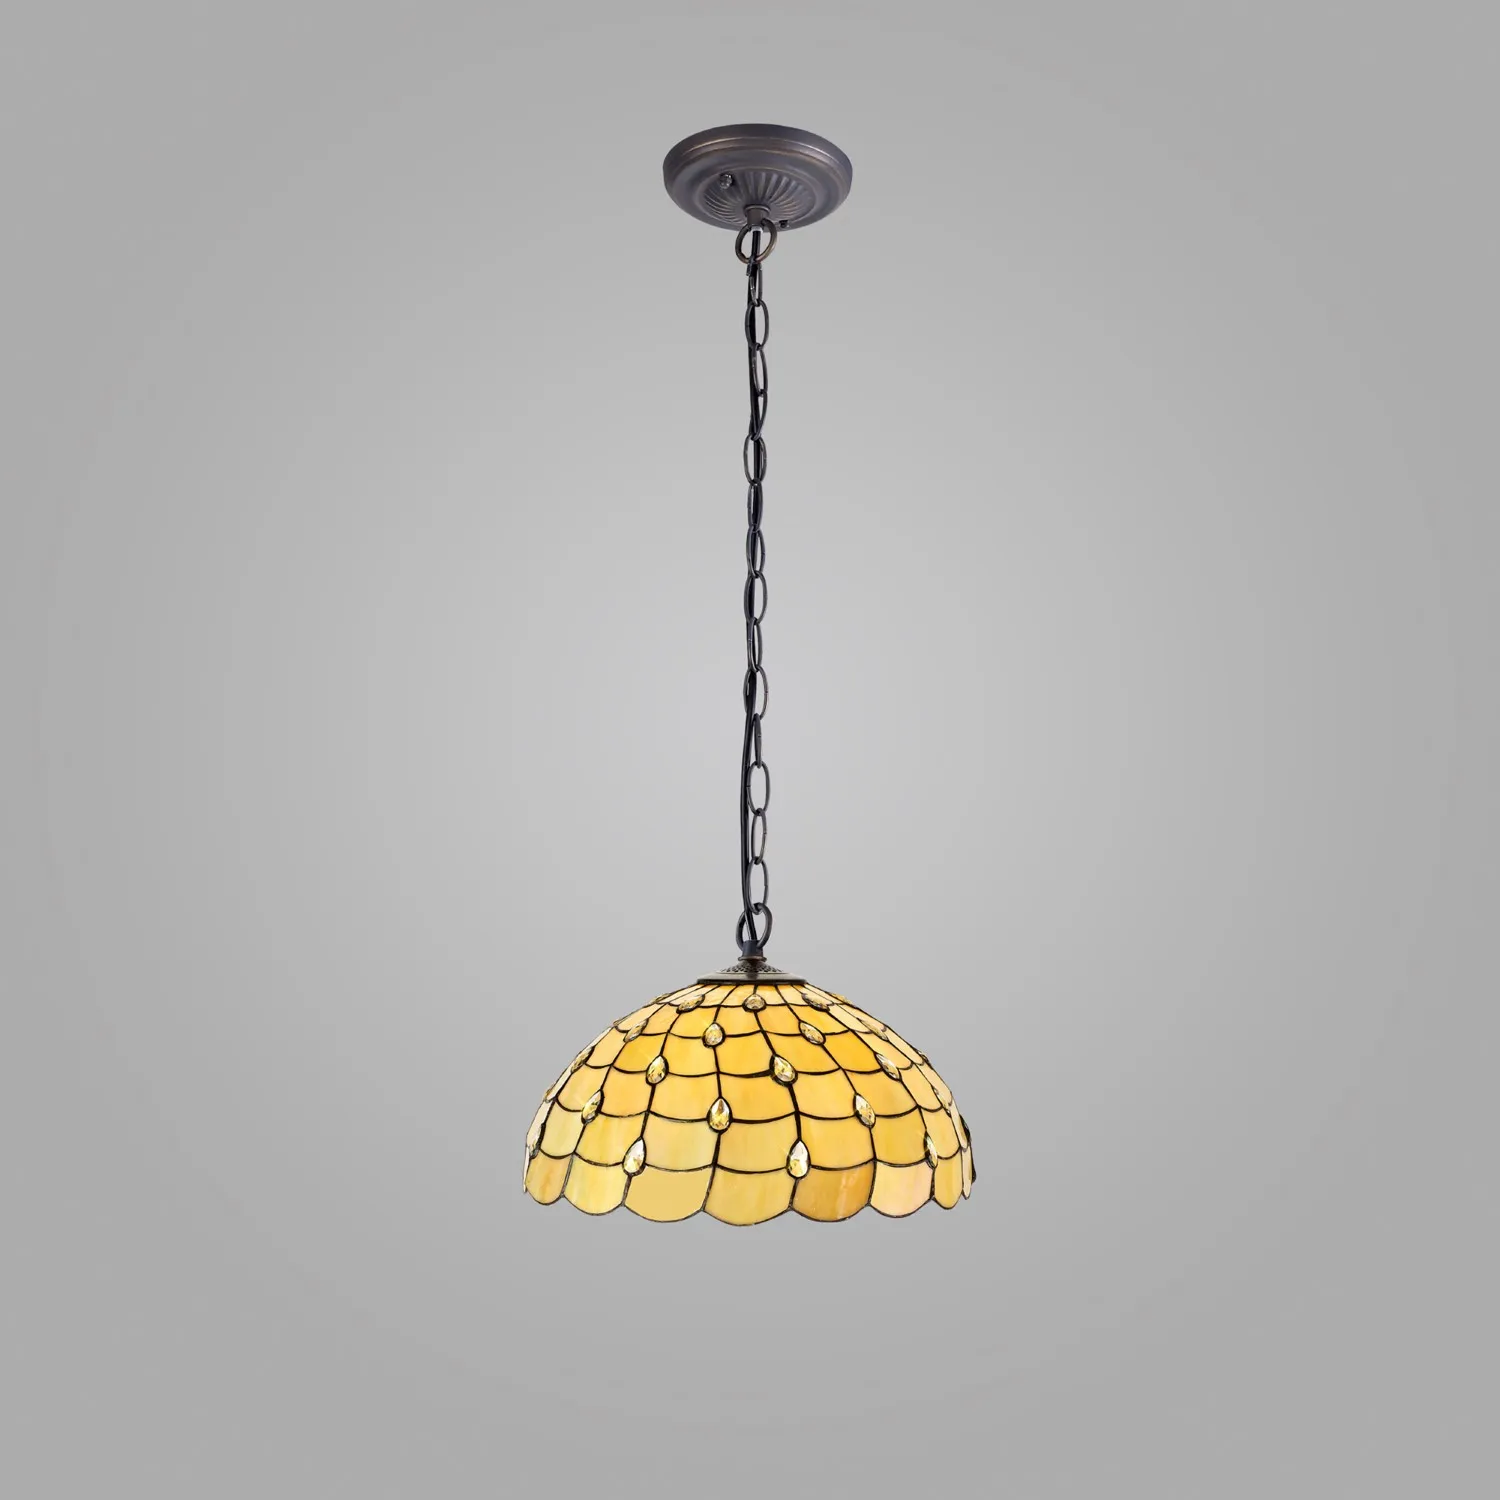 Stratford 1 Light Downlighter Pendant E27 With 50cm Tiffany Shade, Beige Clear Crystal Aged Antique Brass